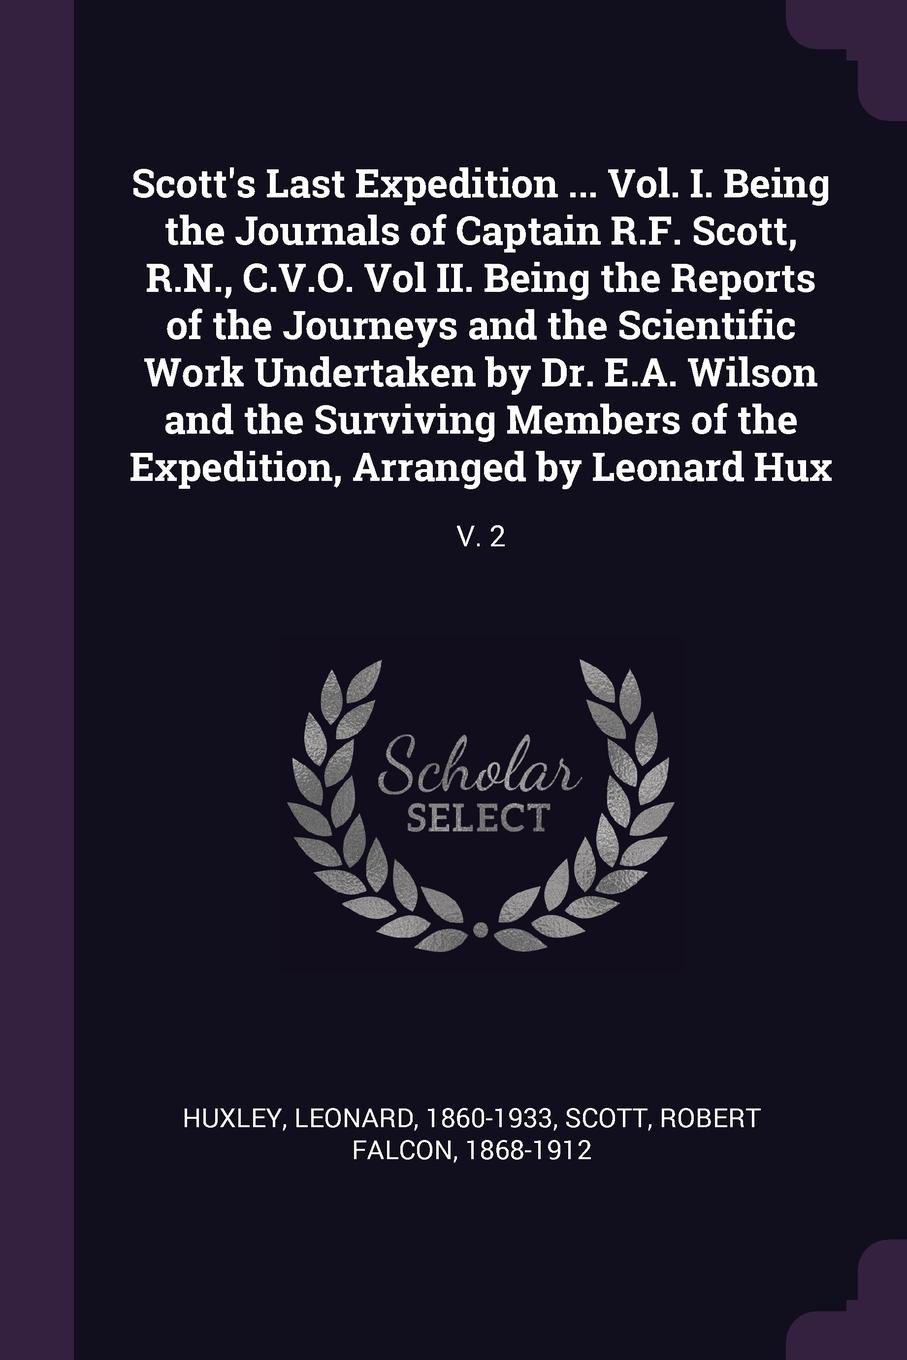 Scott`s Last Expedition ... Vol. I. Being the Journals of Captain R.F. Scott, R.N., C.V.O. Vol II. Being the Reports of the Journeys and the Scientific Work Undertaken by Dr. E.A. Wilson and the Surviving Members of the Expedition, Arranged by Leo...